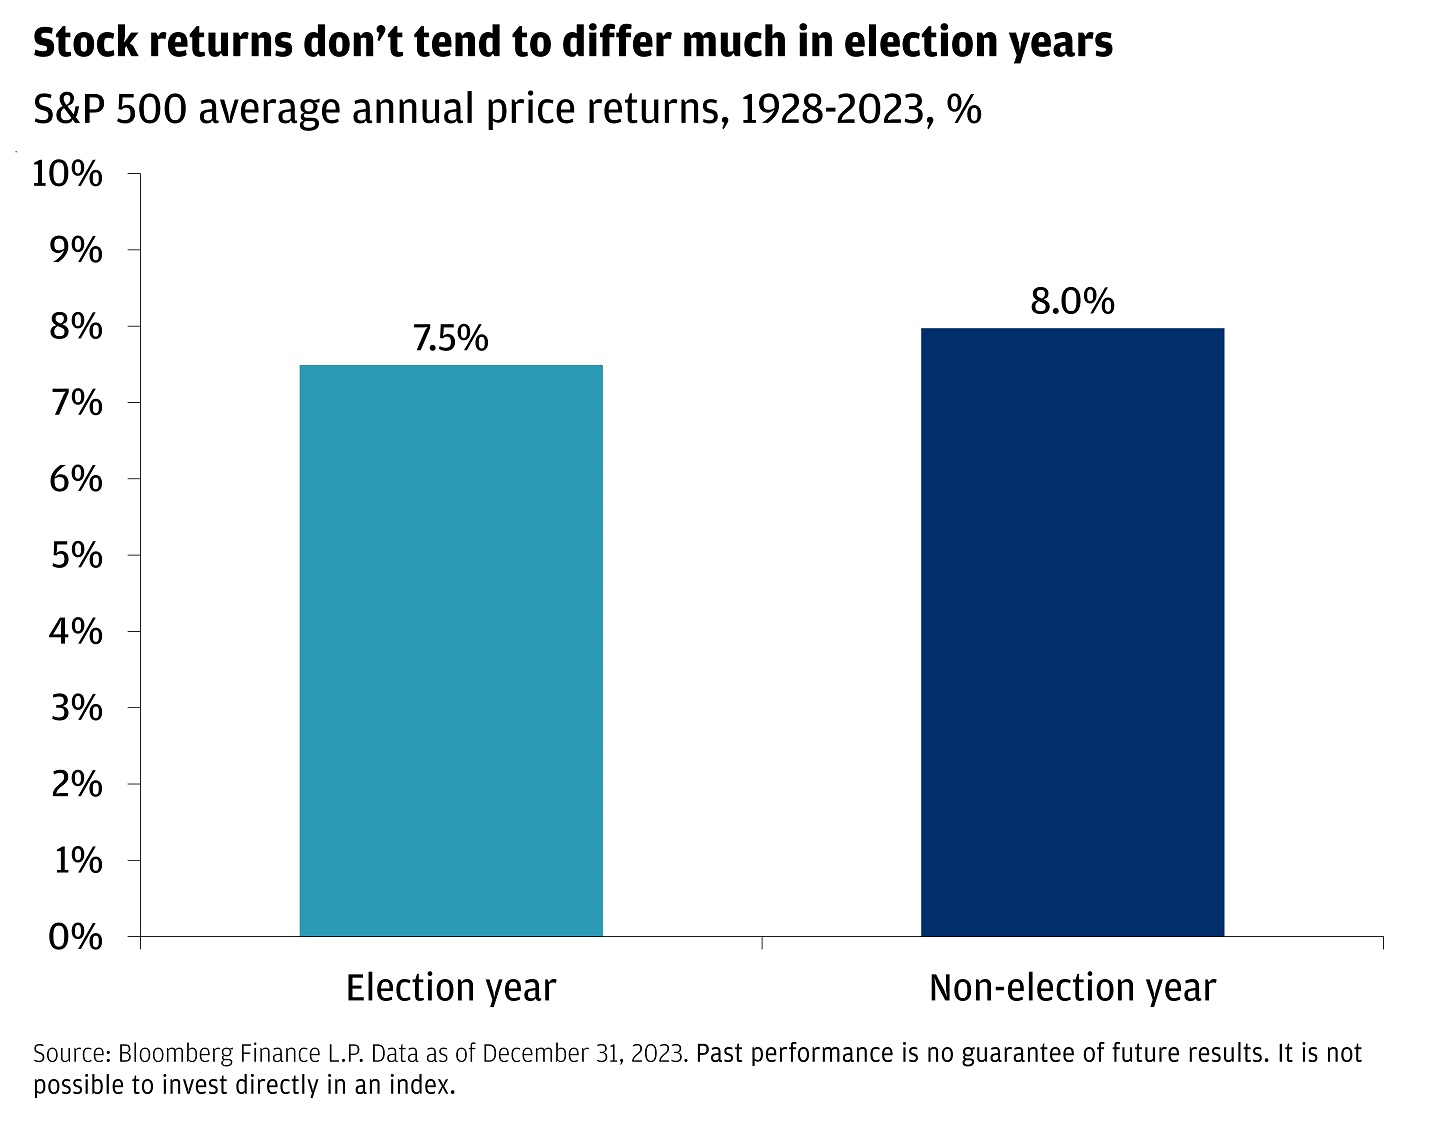 The bar graph shows the S&P 500 average annual price returns from 1926-2023 in election years versus non-election years.